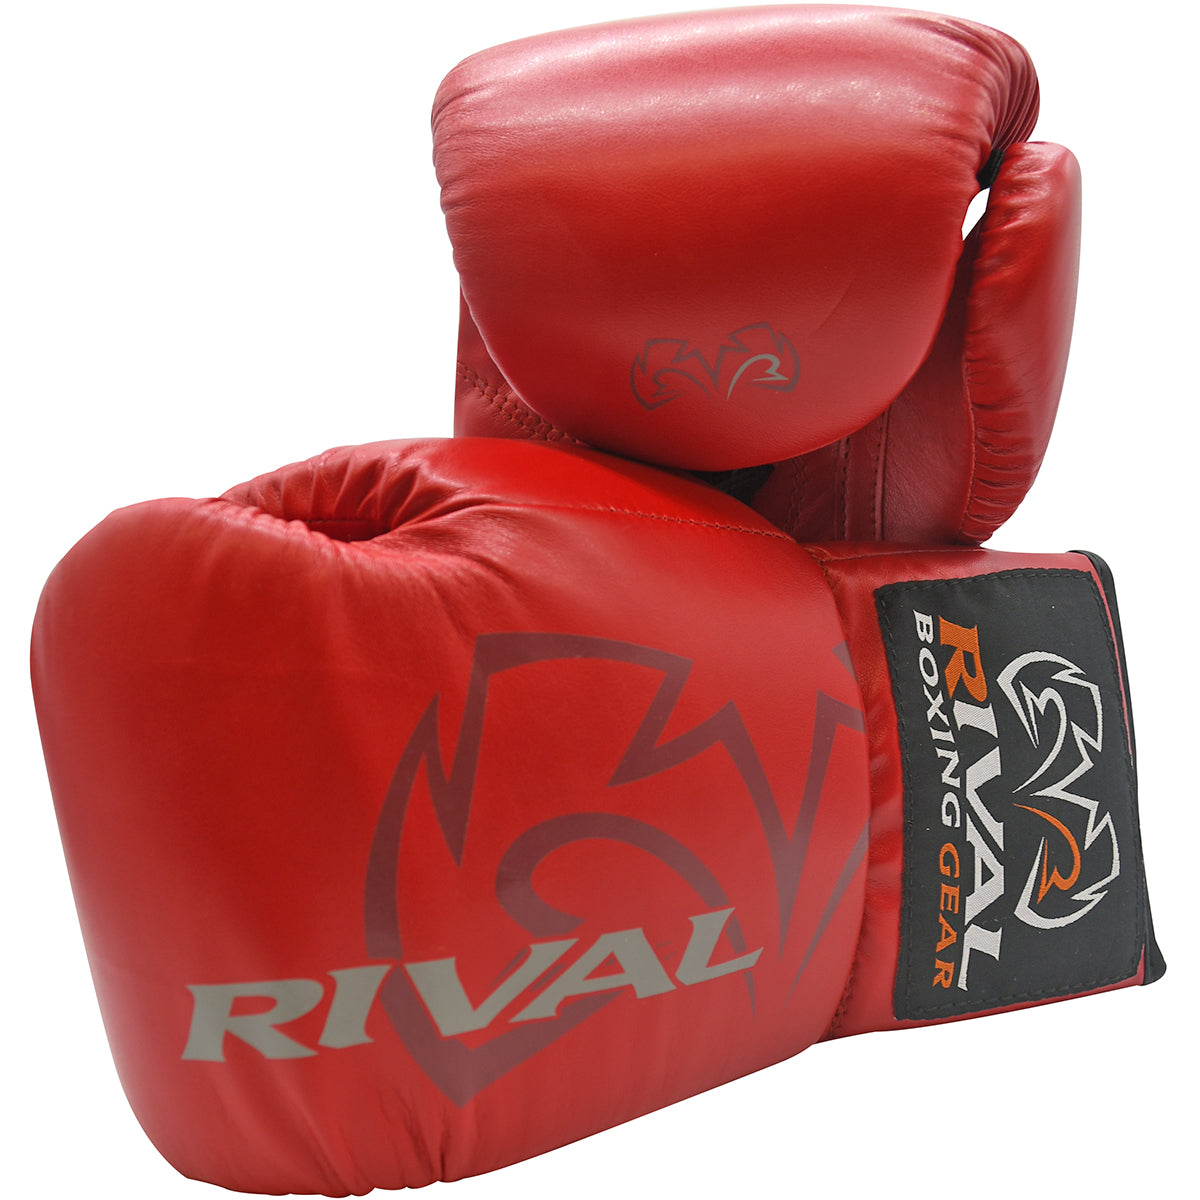 Rival Boxing Autograph Boxing Gloves - Red RIVAL